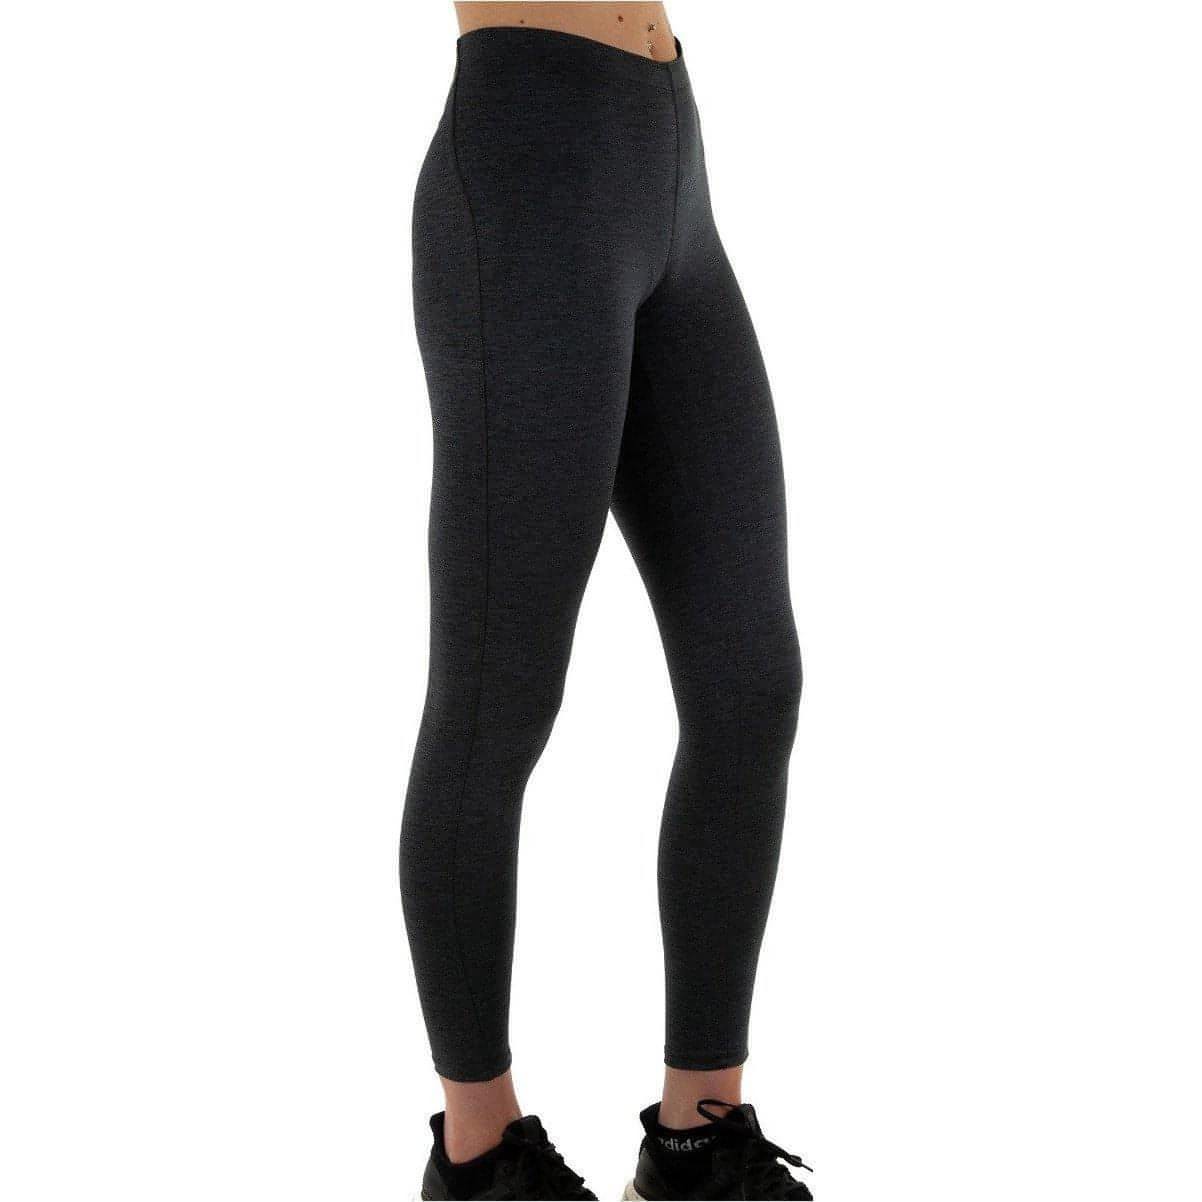 More Mile Train To Run Womens Long Running Tights - Grey - Start Fitness